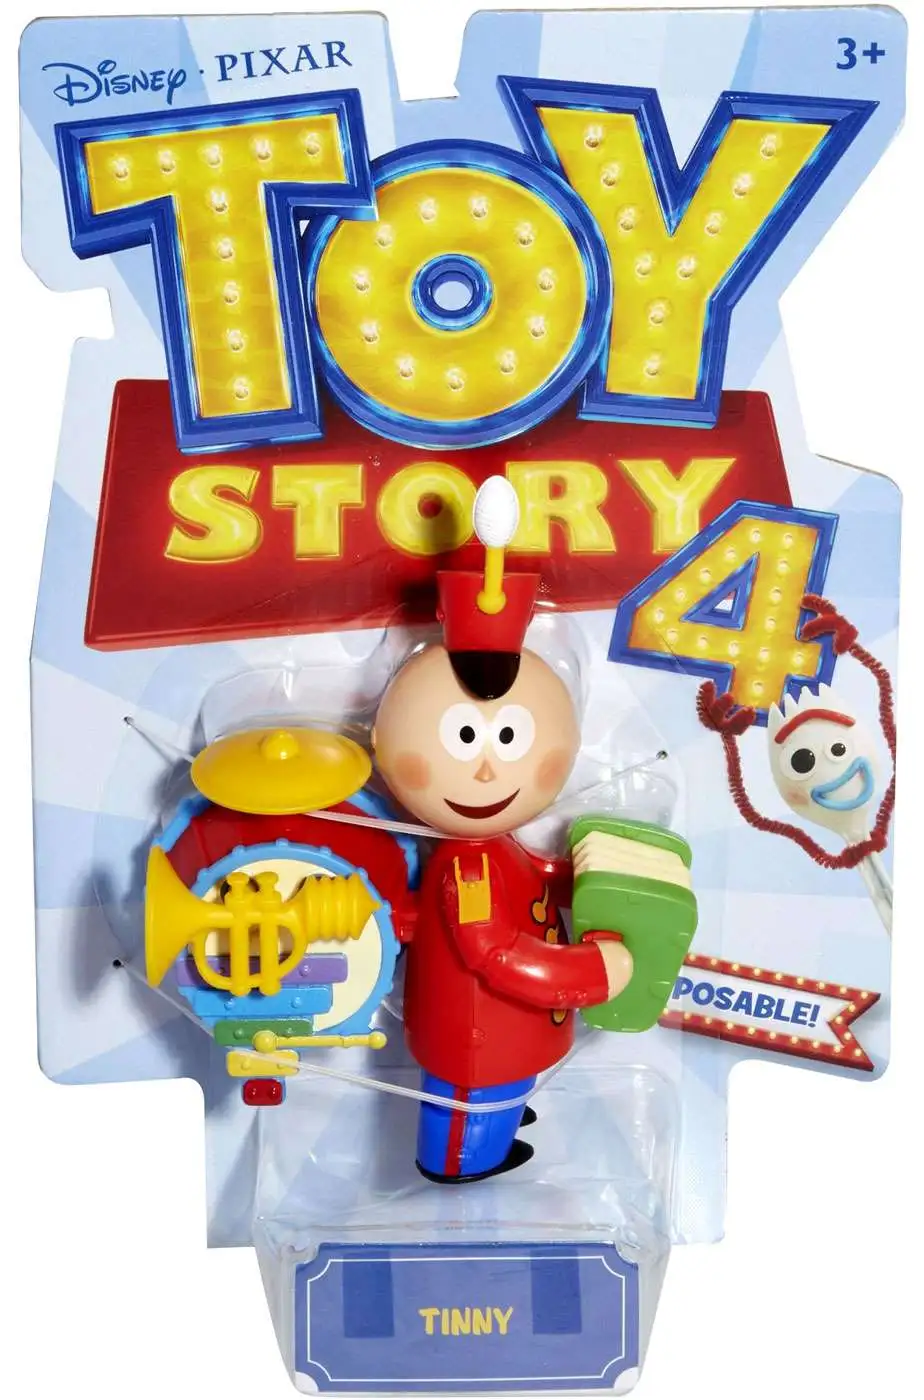 Toy Story 4 Tinny Possble Action Figure Brand New In Hand Pixar 